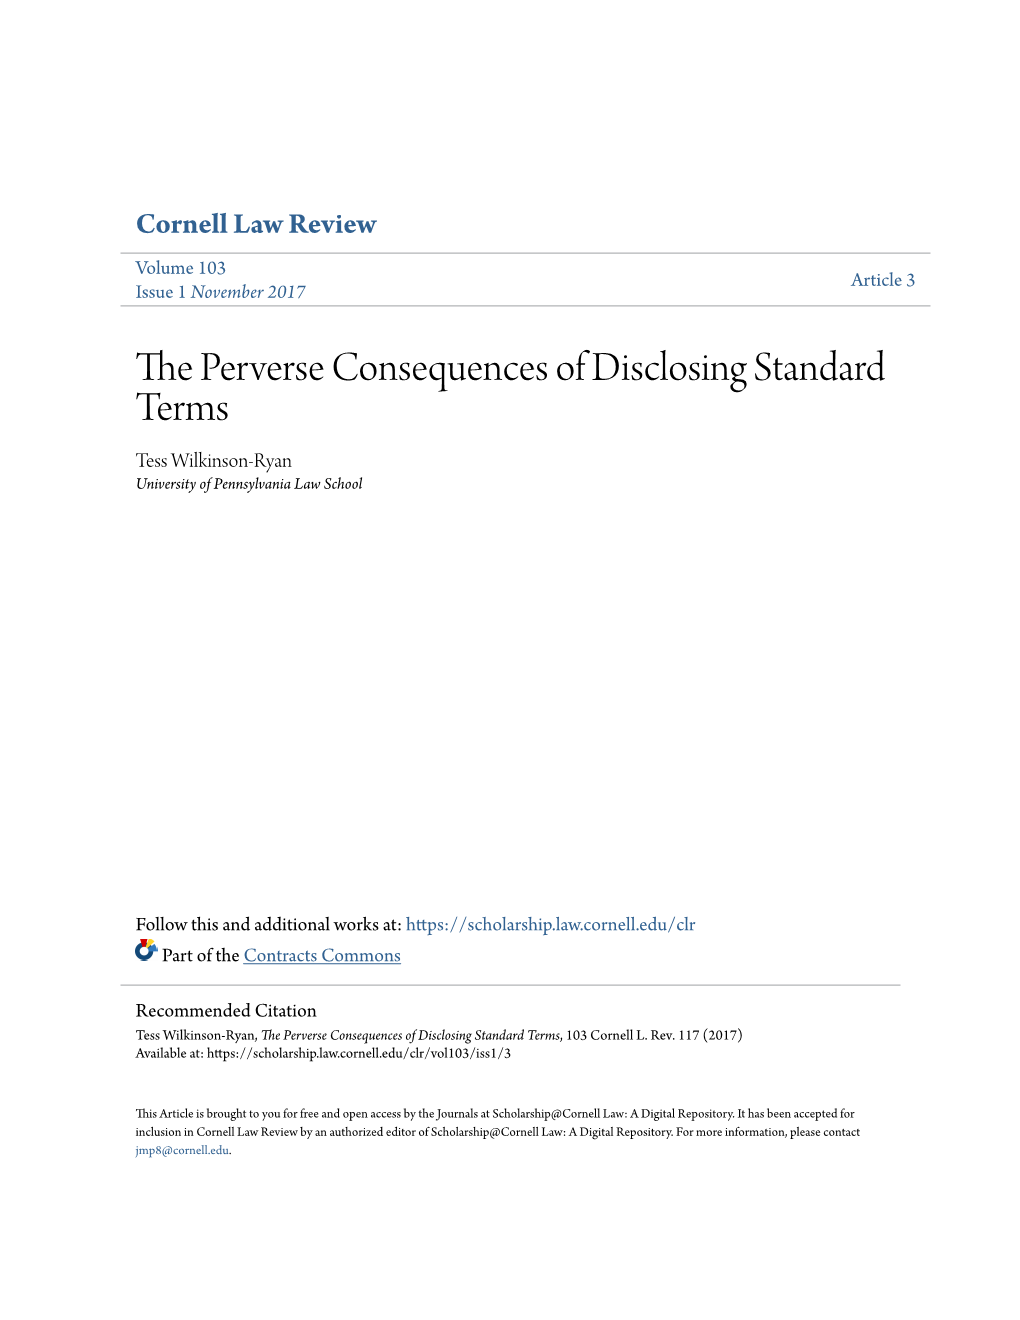 The Perverse Consequences of Disclosing Standard Terms, 103 Cornell L